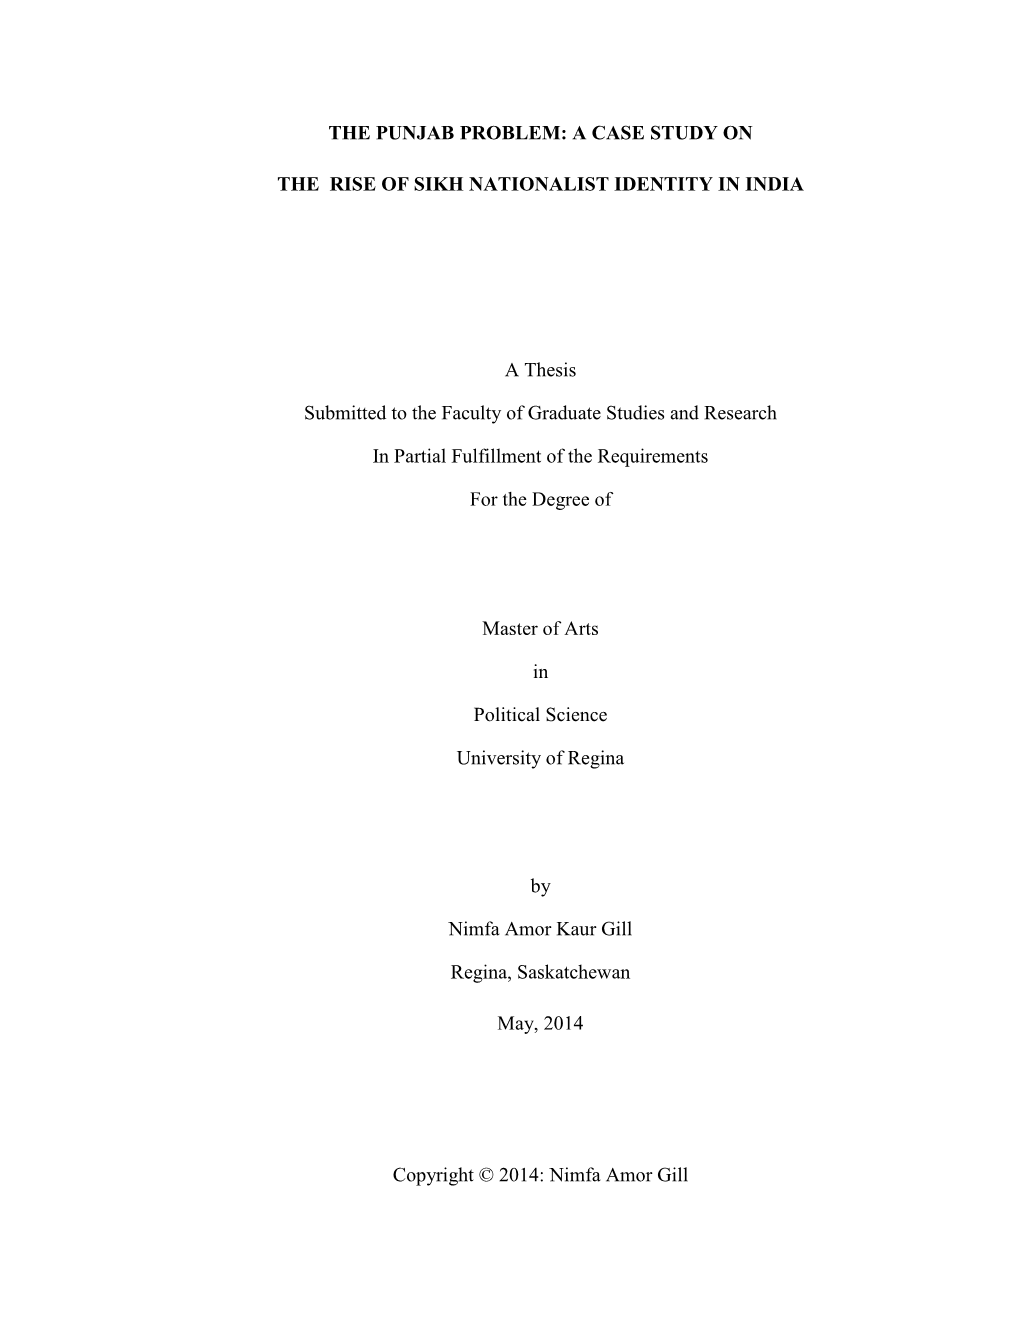 A CASE STUDY on the RISE of SIKH NATIONALIST IDENTITY in INDIA a Thesis Submitted to the Faculty of Gradu